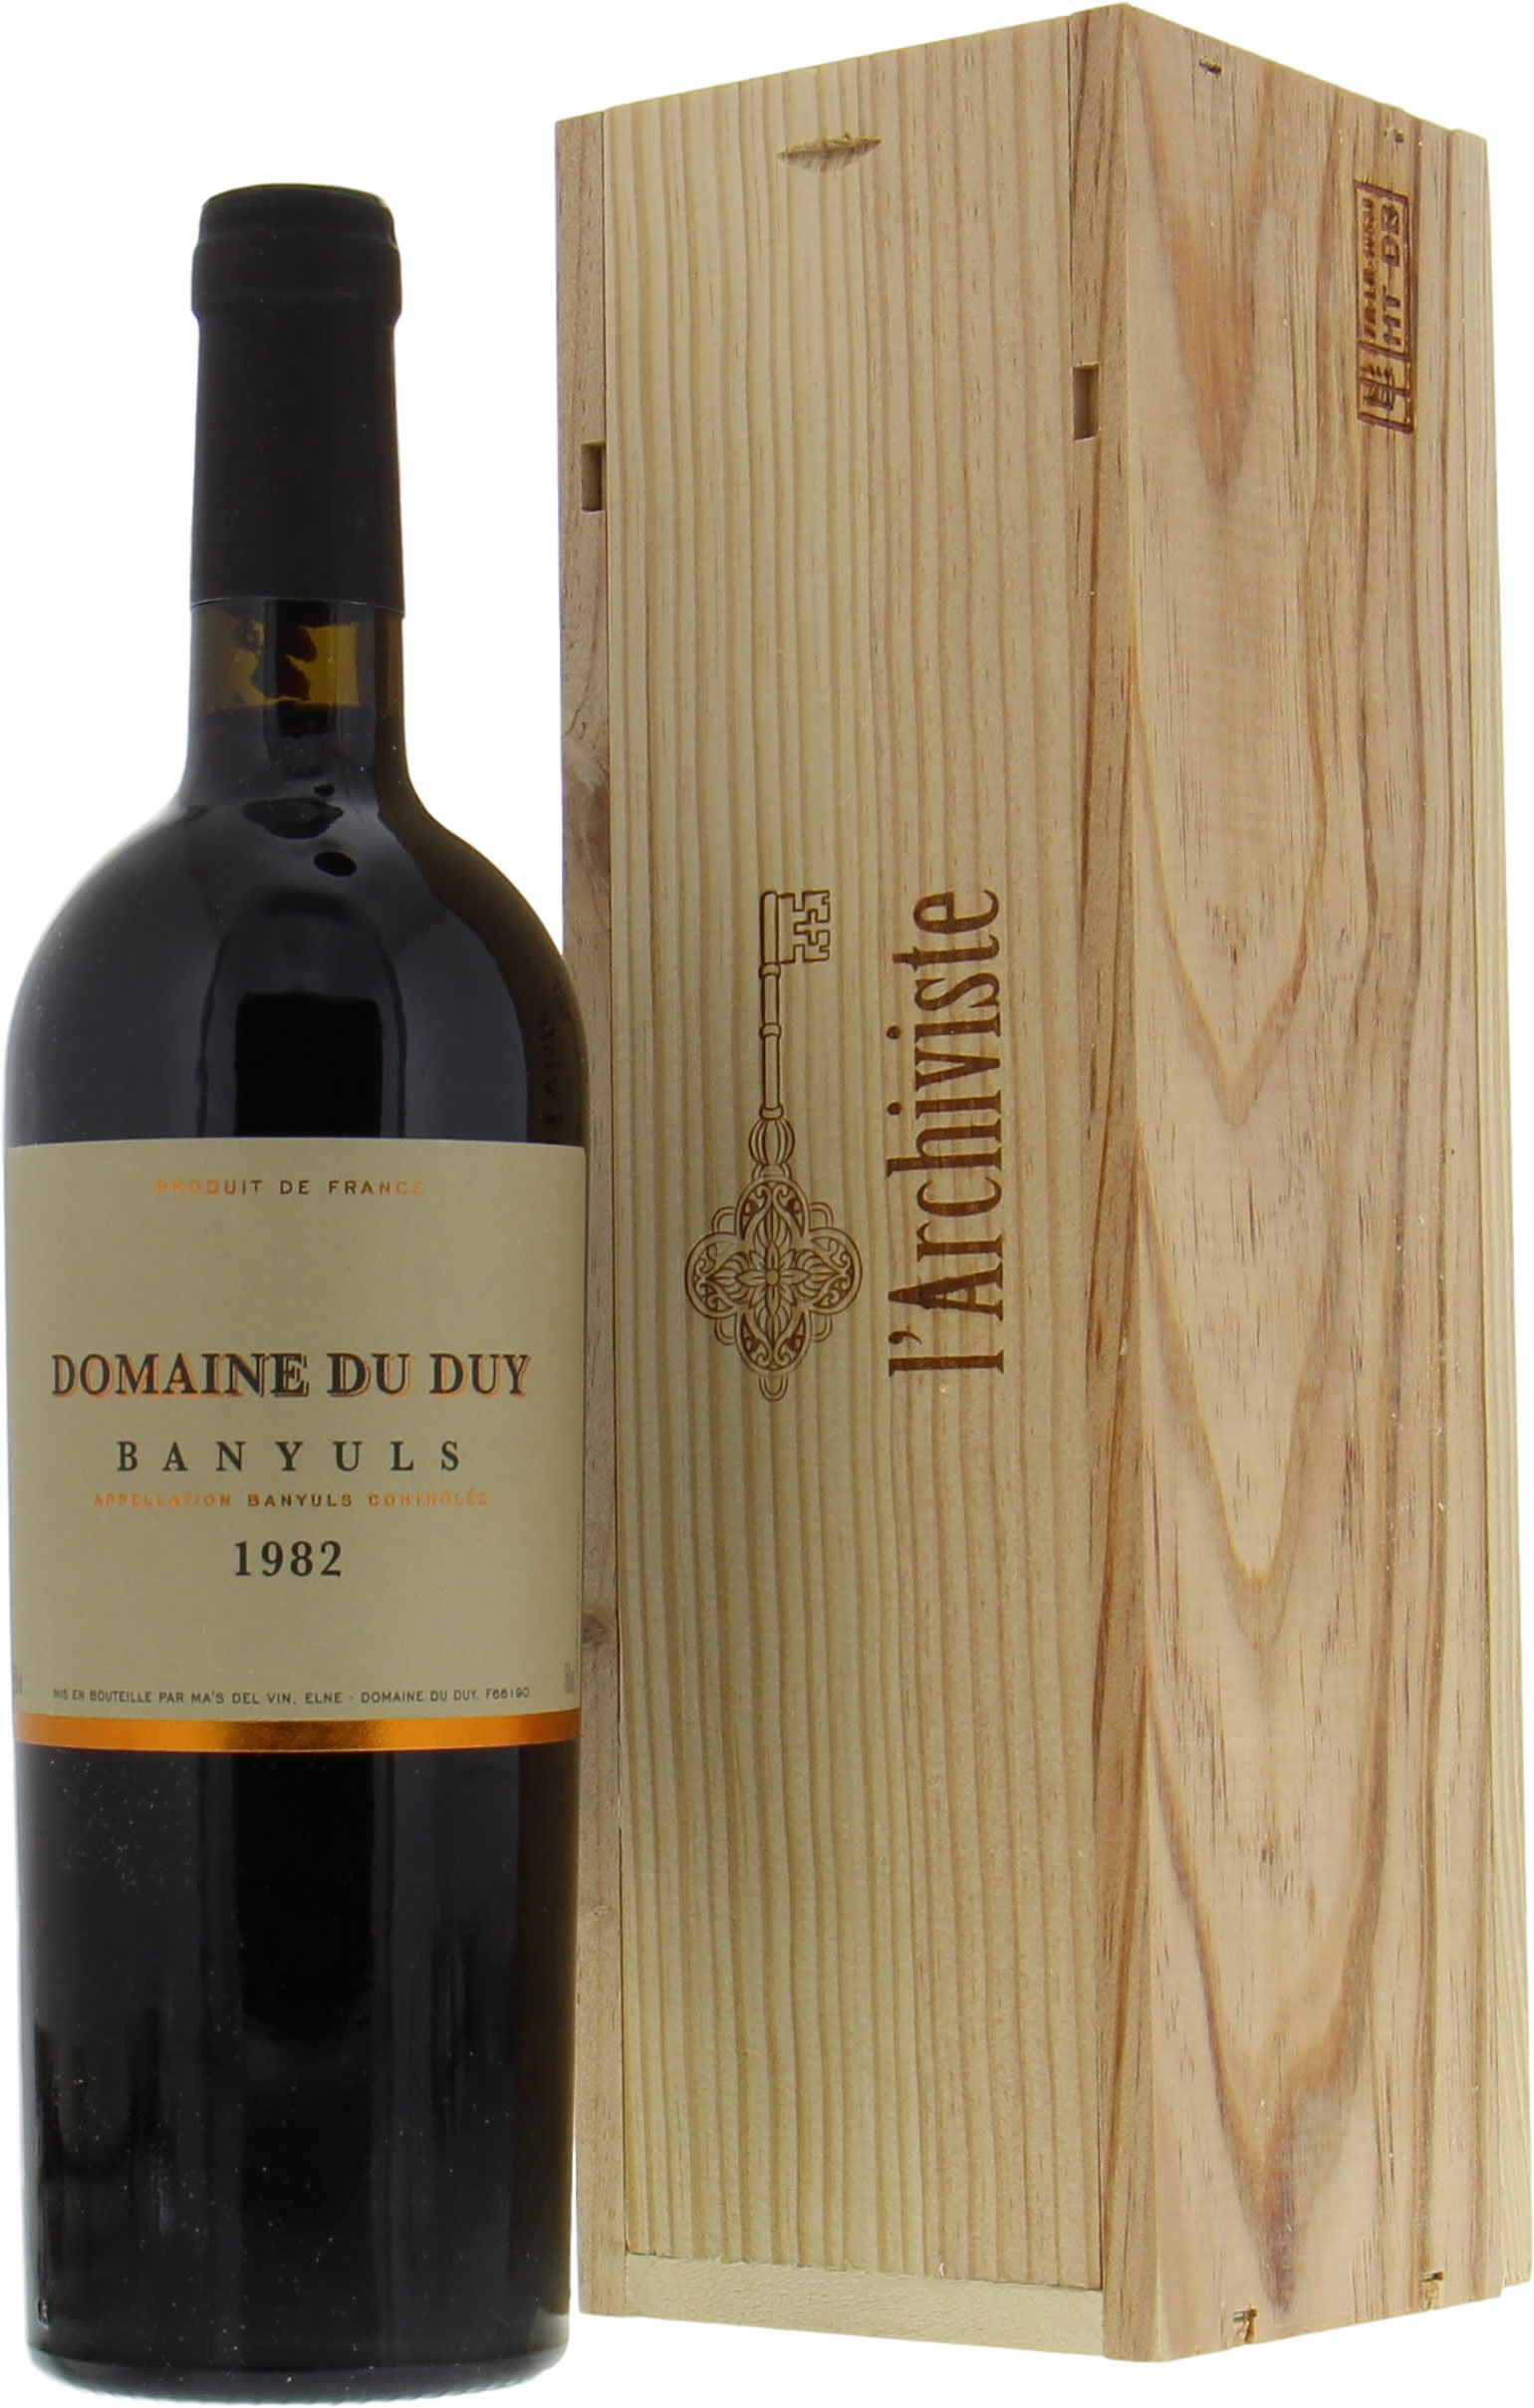 Domaine du Duy - Banyuls 1982 Perfect